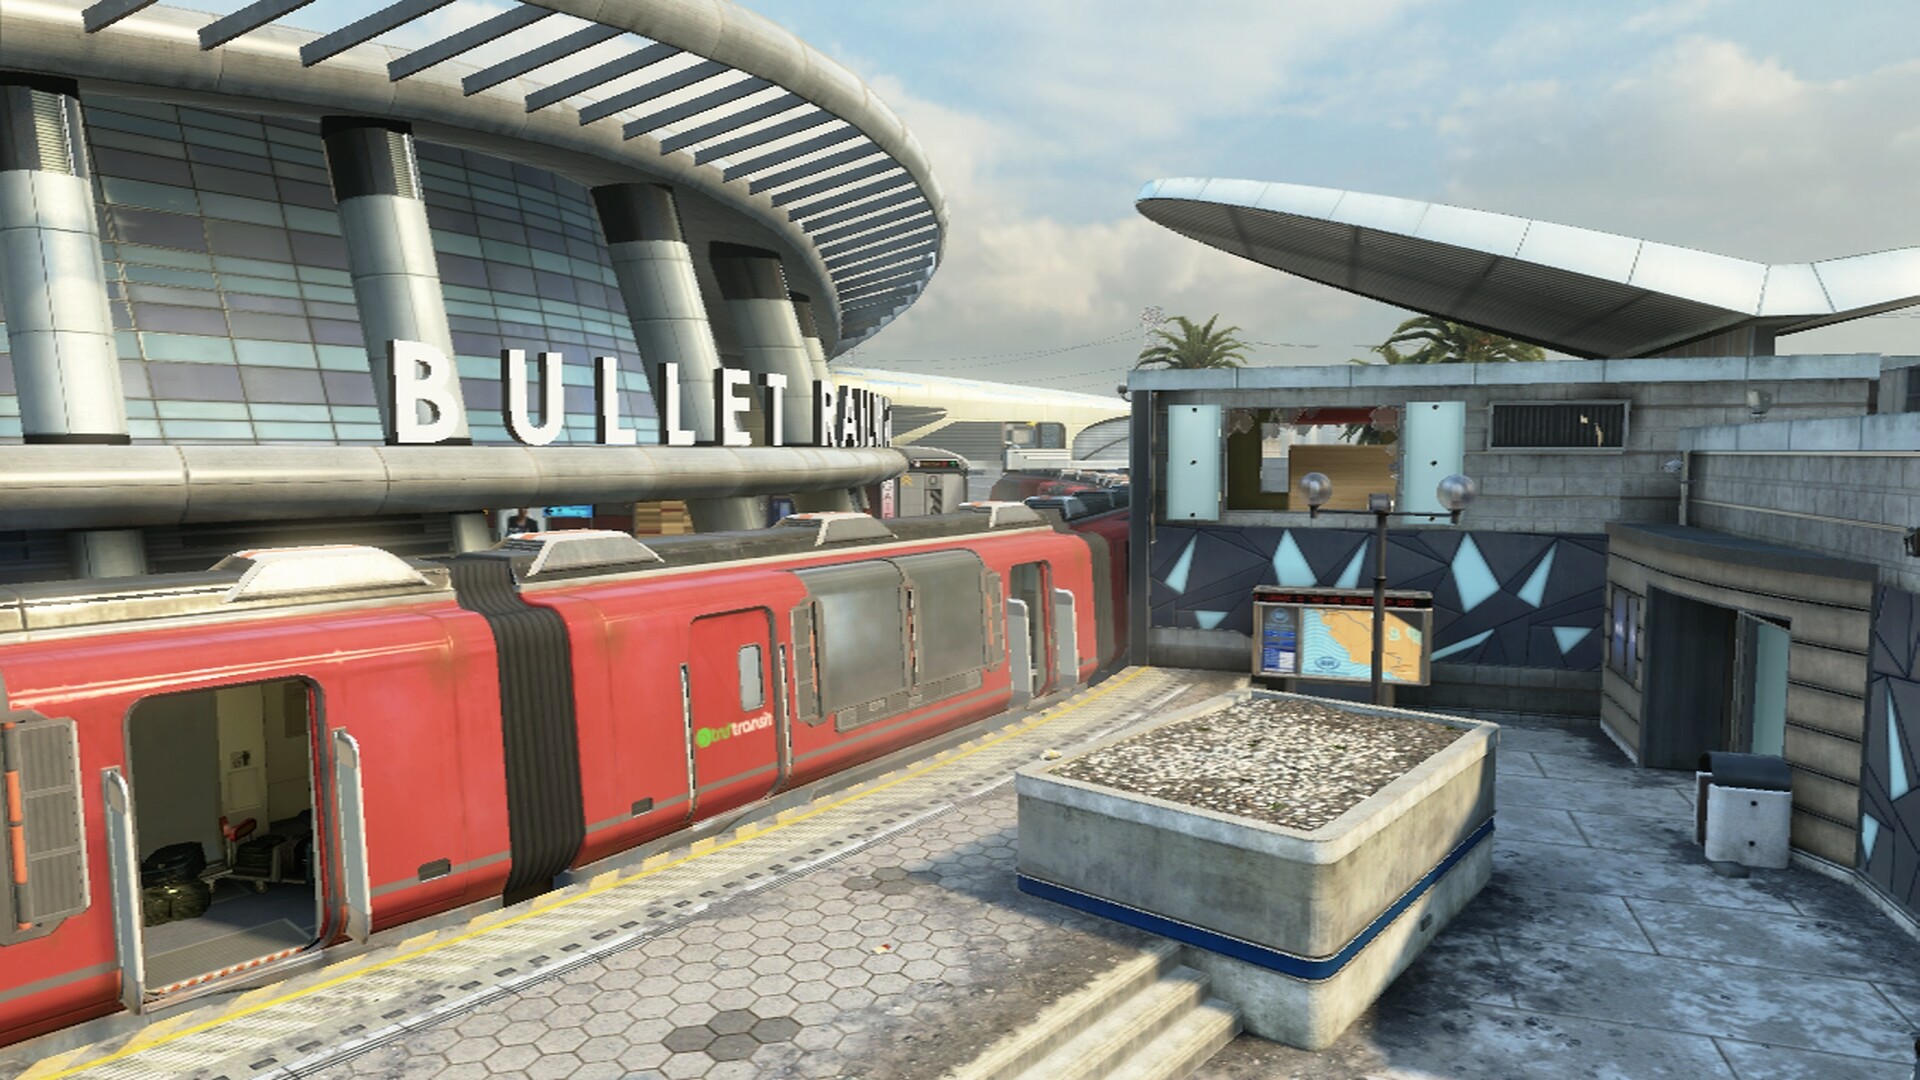 Express (map), Call of Duty Wiki